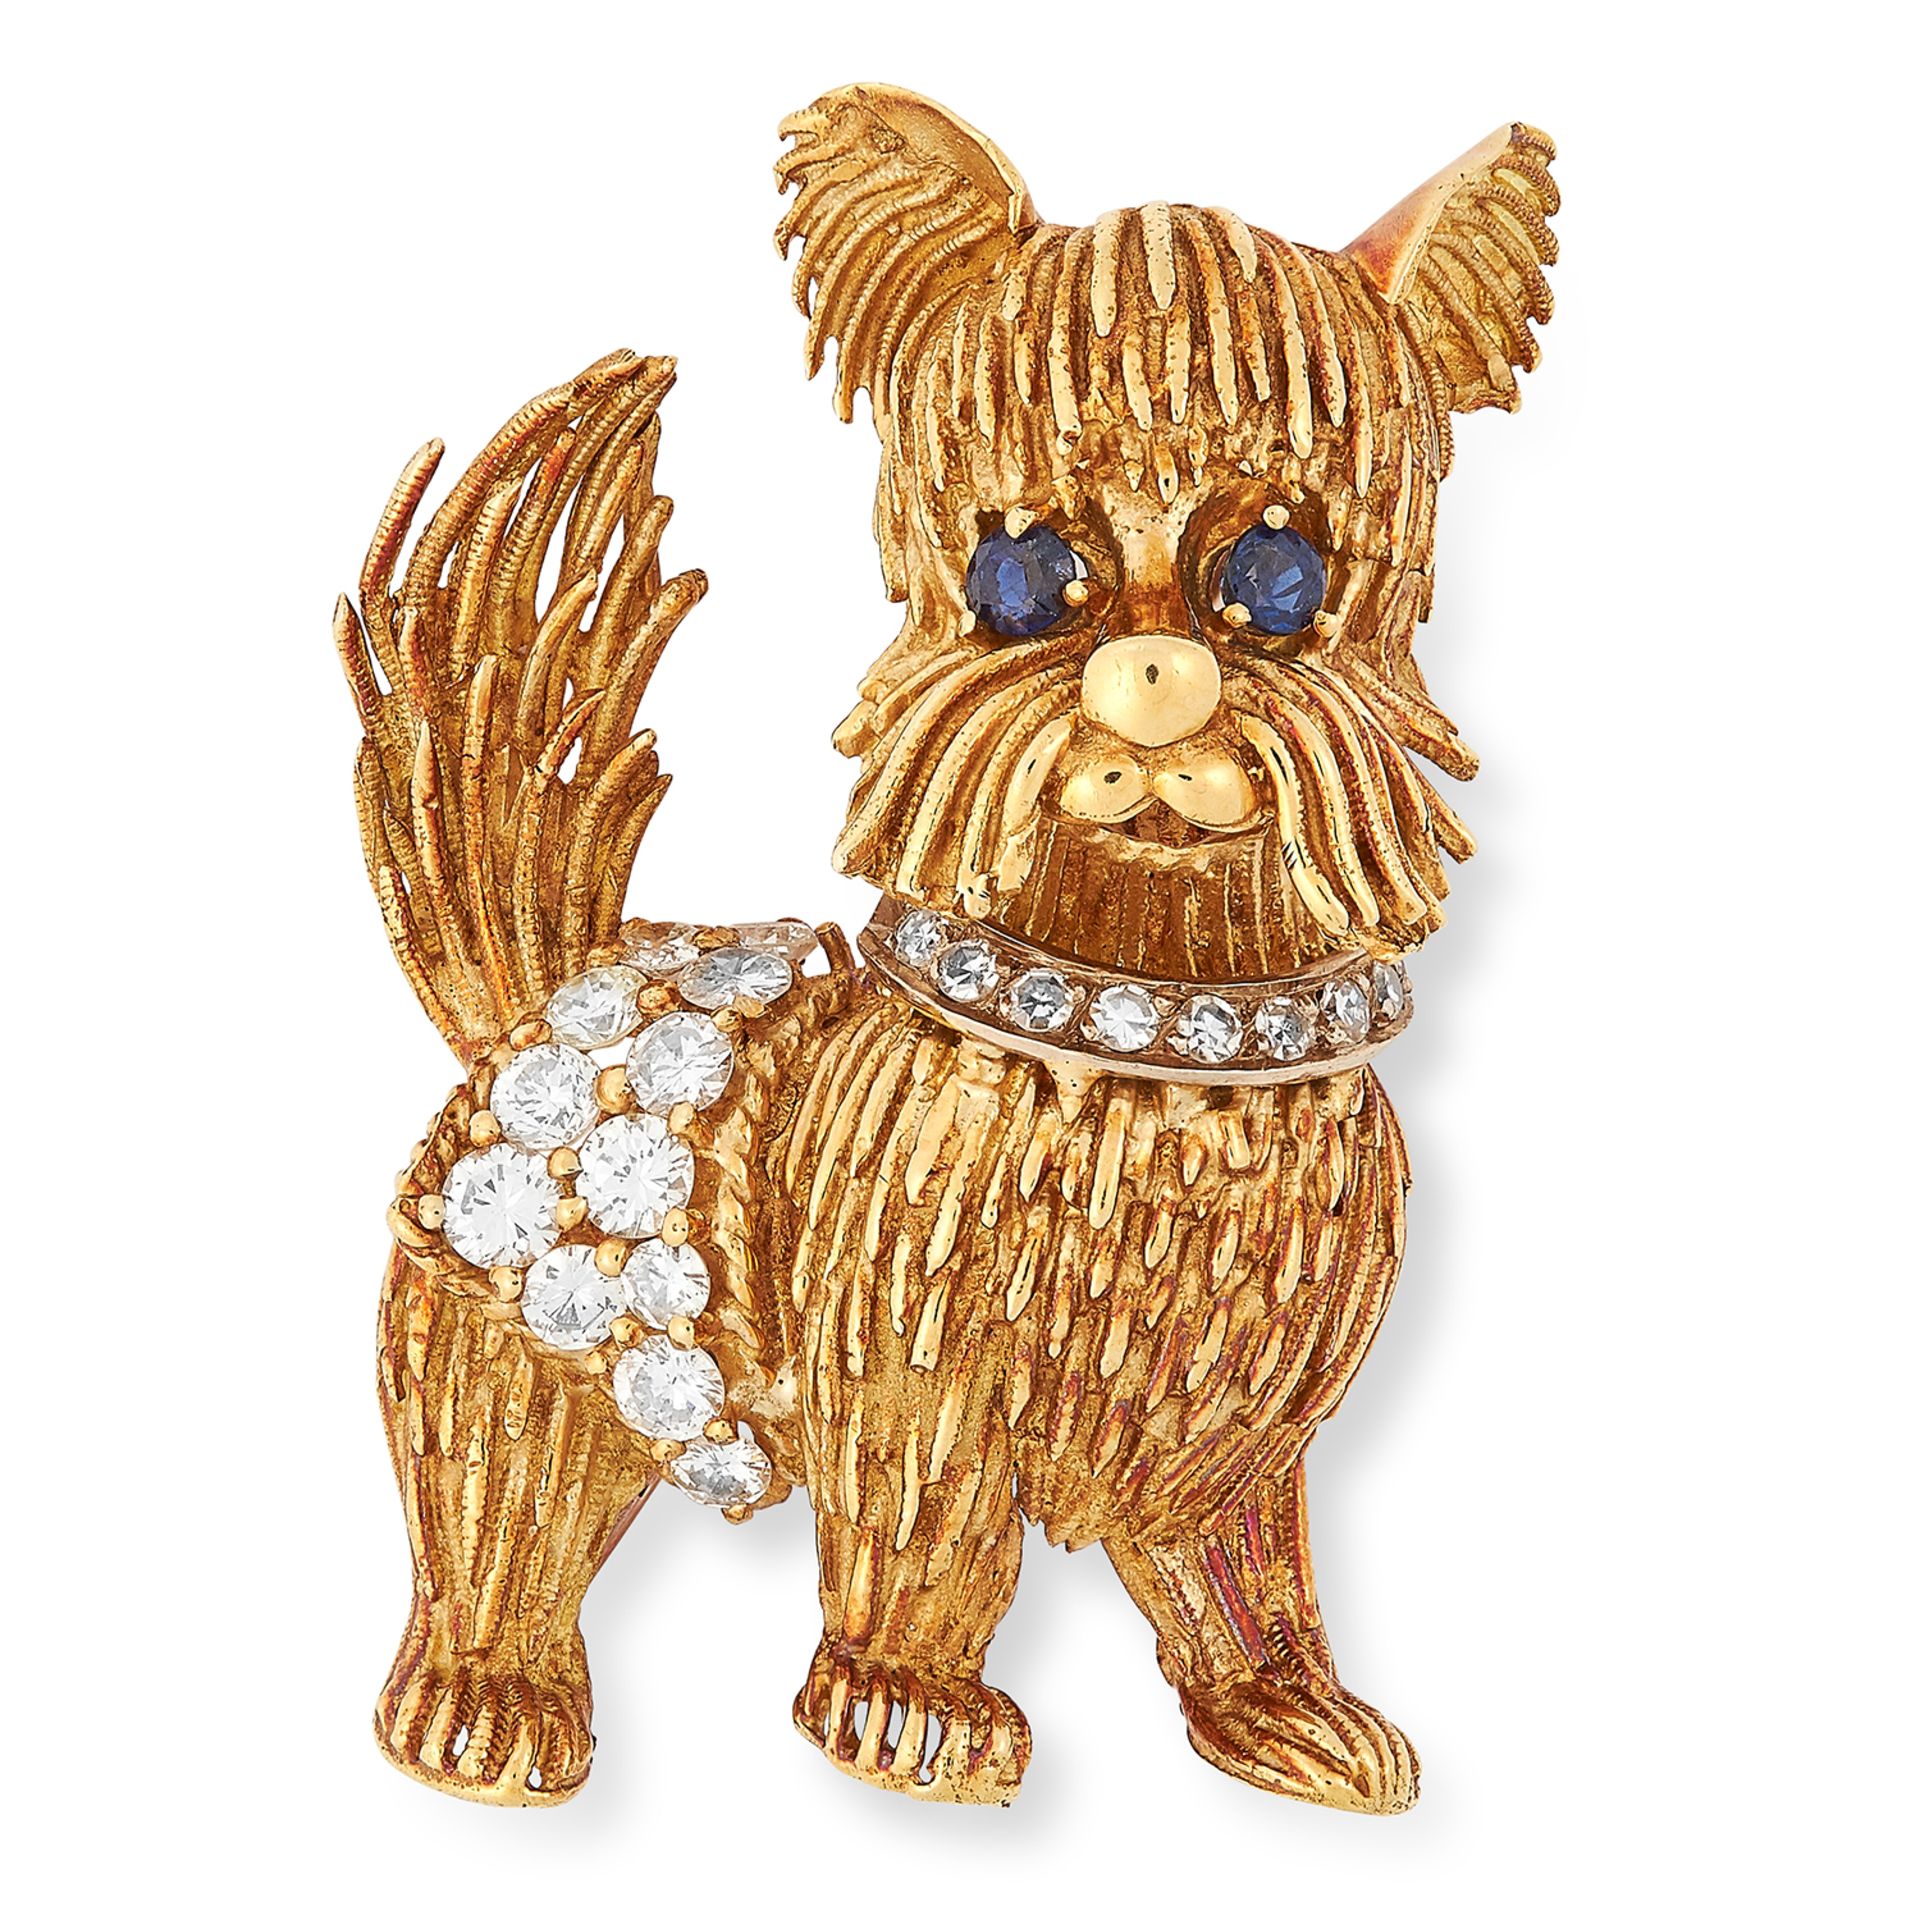 A VINTAGE SAPPHIRE AND DIAMOND DOG BROOCH, BEN ROSENFELD 1964 designed as a dog, set with round